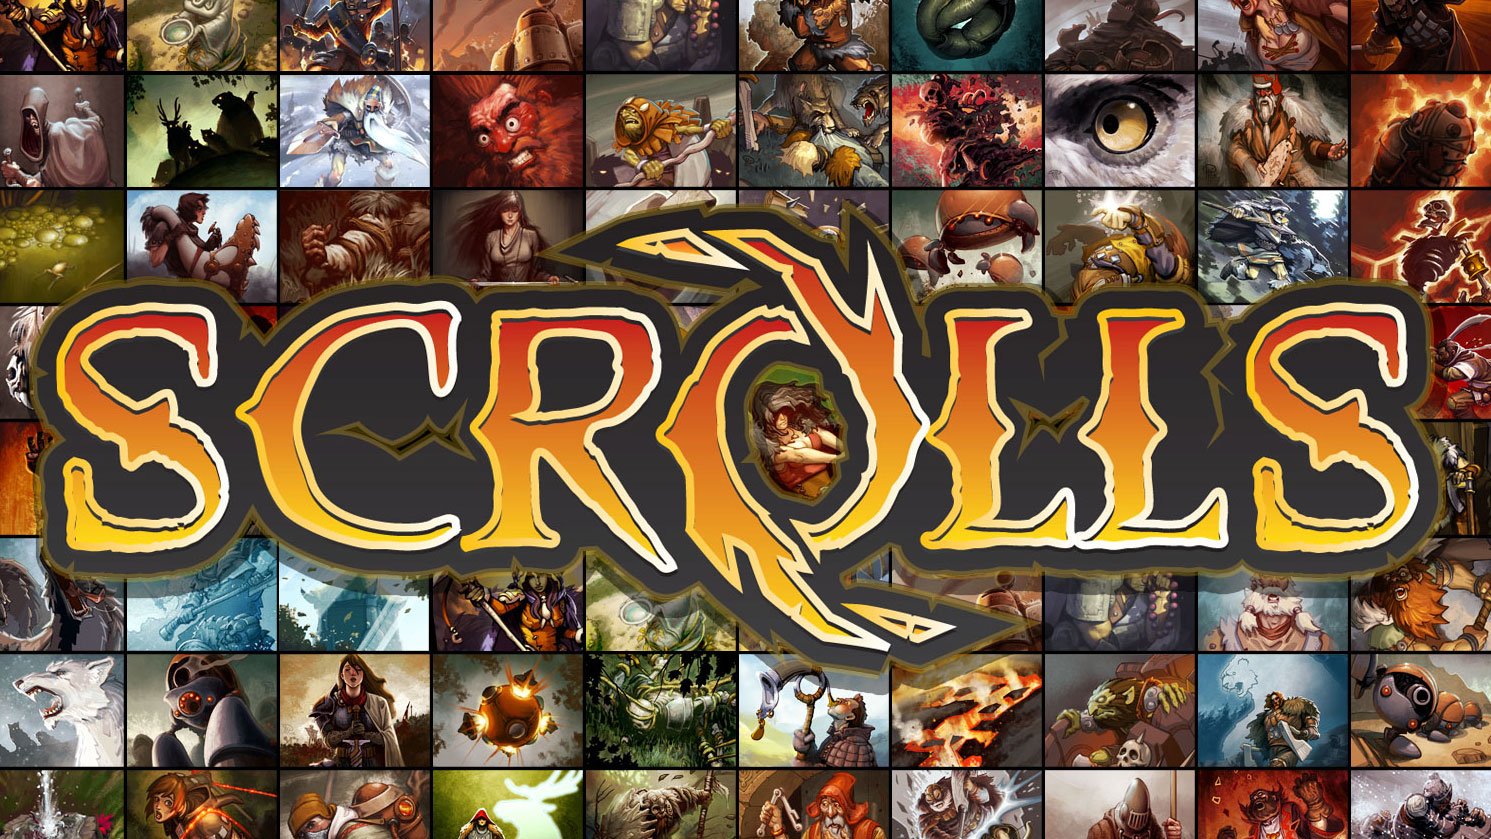 Scrolls Android Release Date Set for December 11, iPad ‘Later’